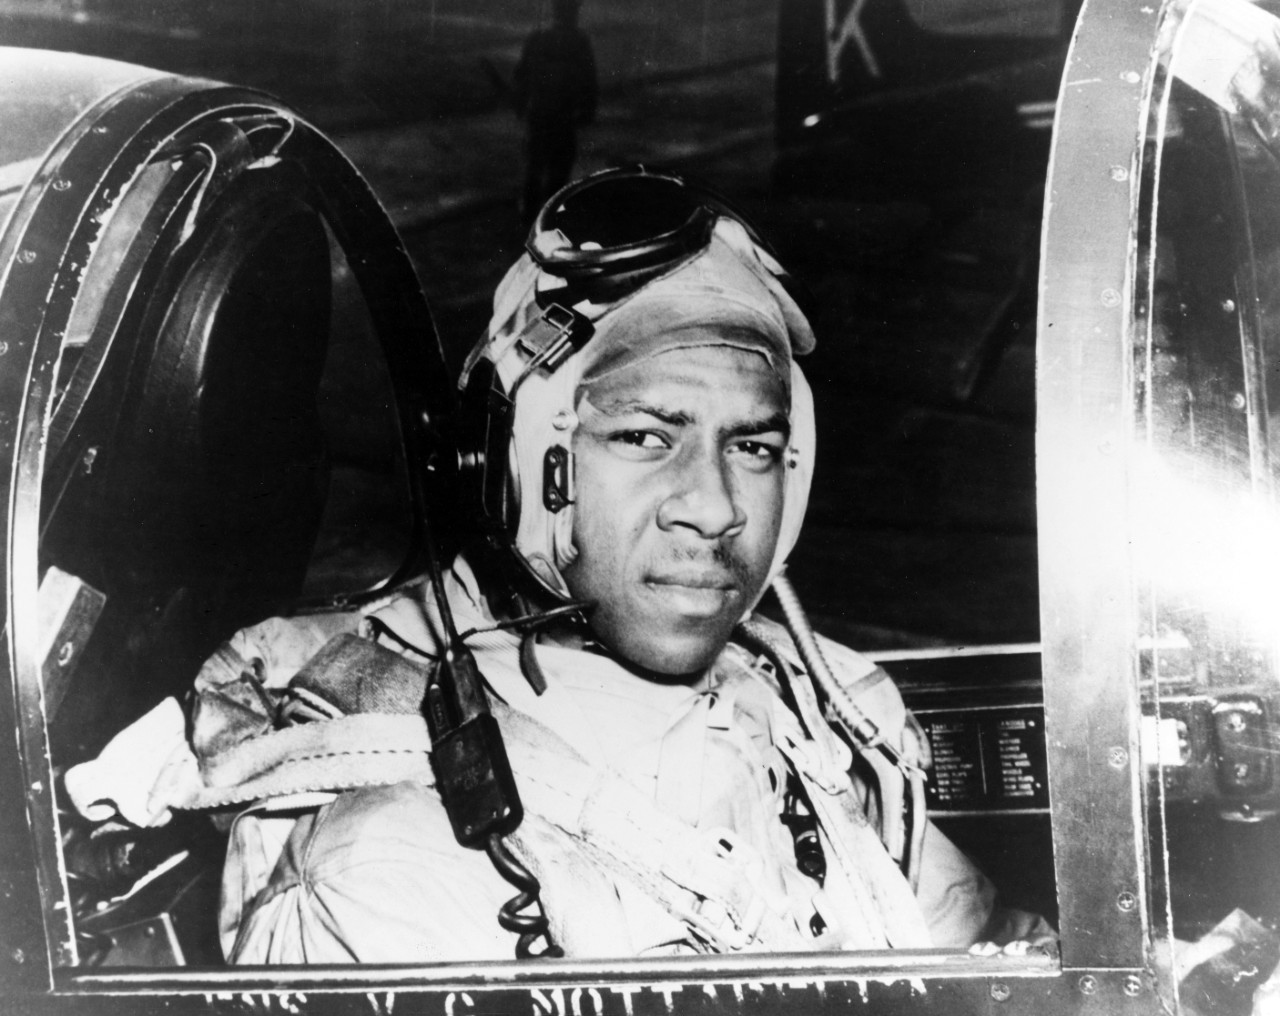 A photograph of an African American man in flight gear in the cockpit of a plane.